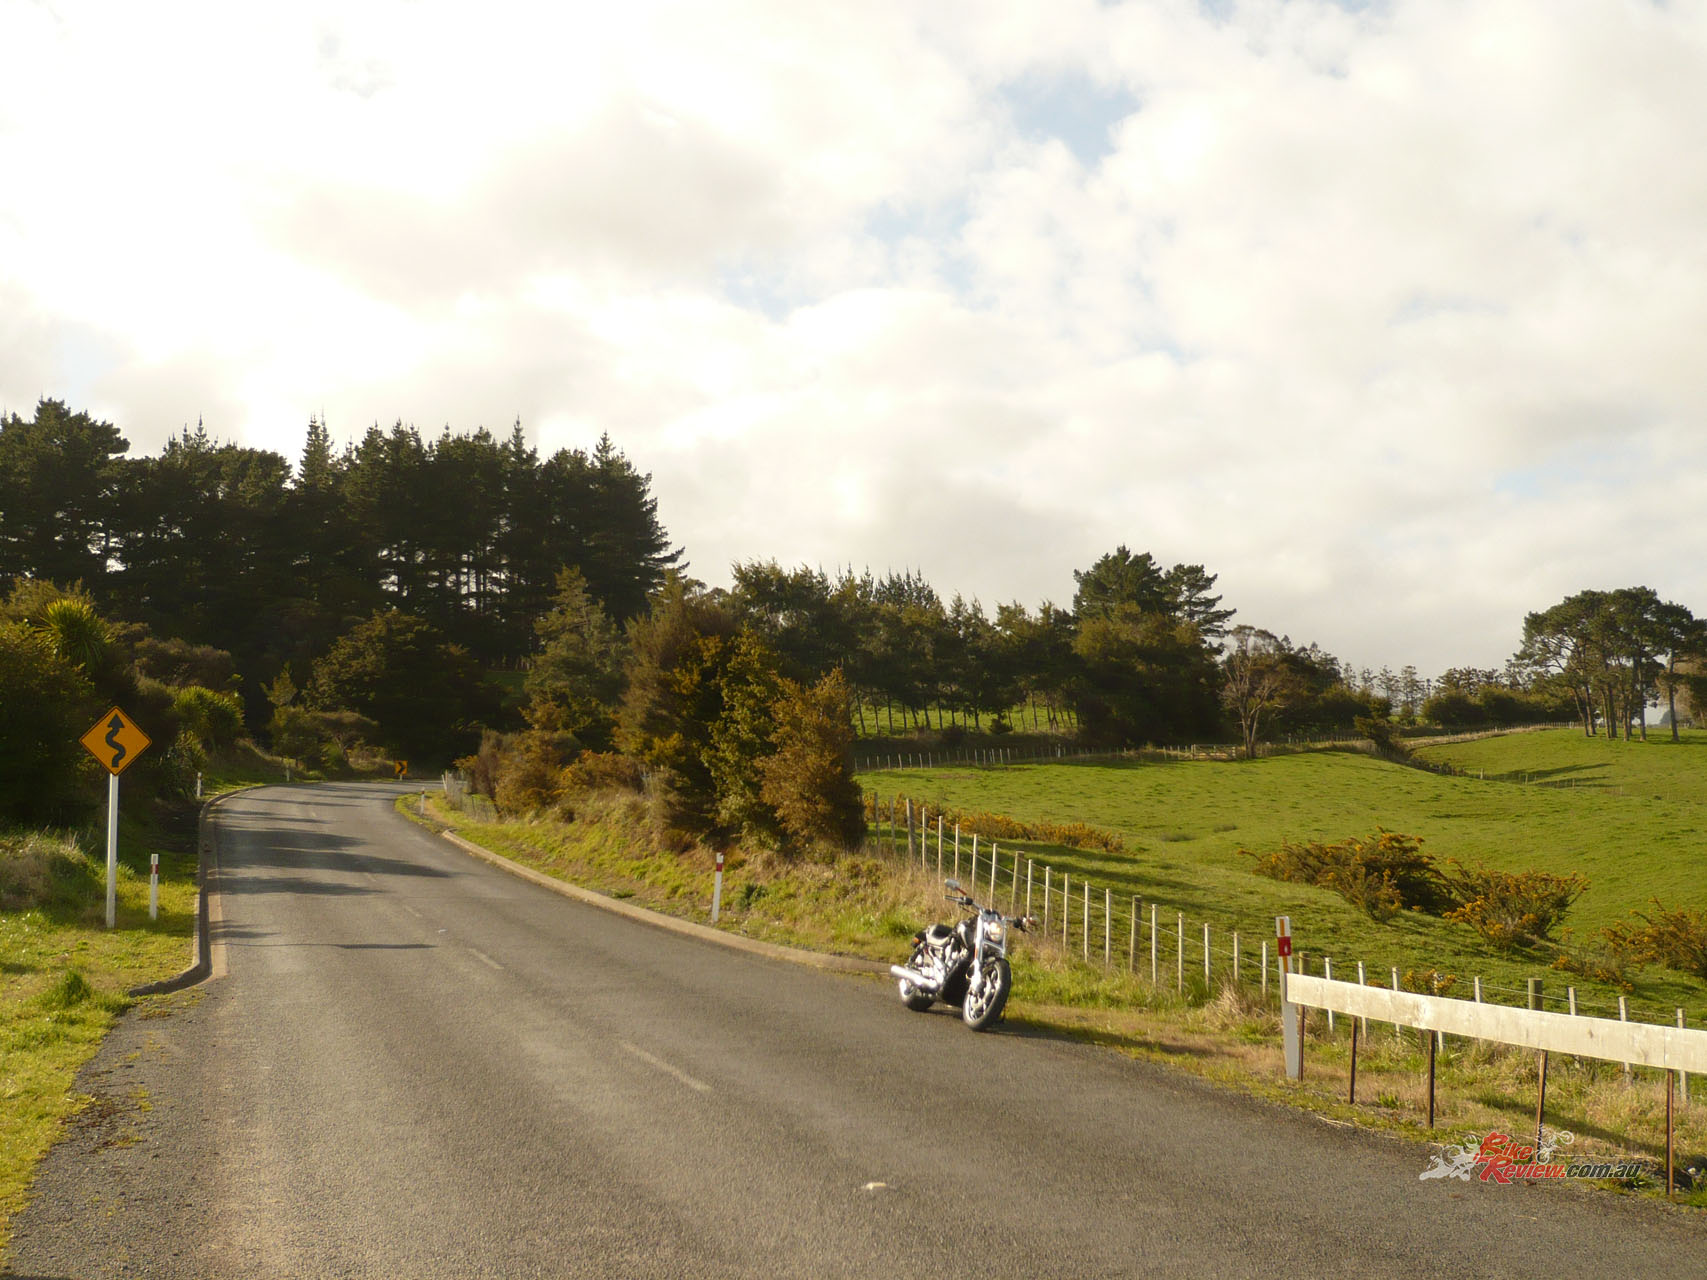 The road to Dargaville. It's seriously a nice area and NZ is only a three hour flight for Aussies!